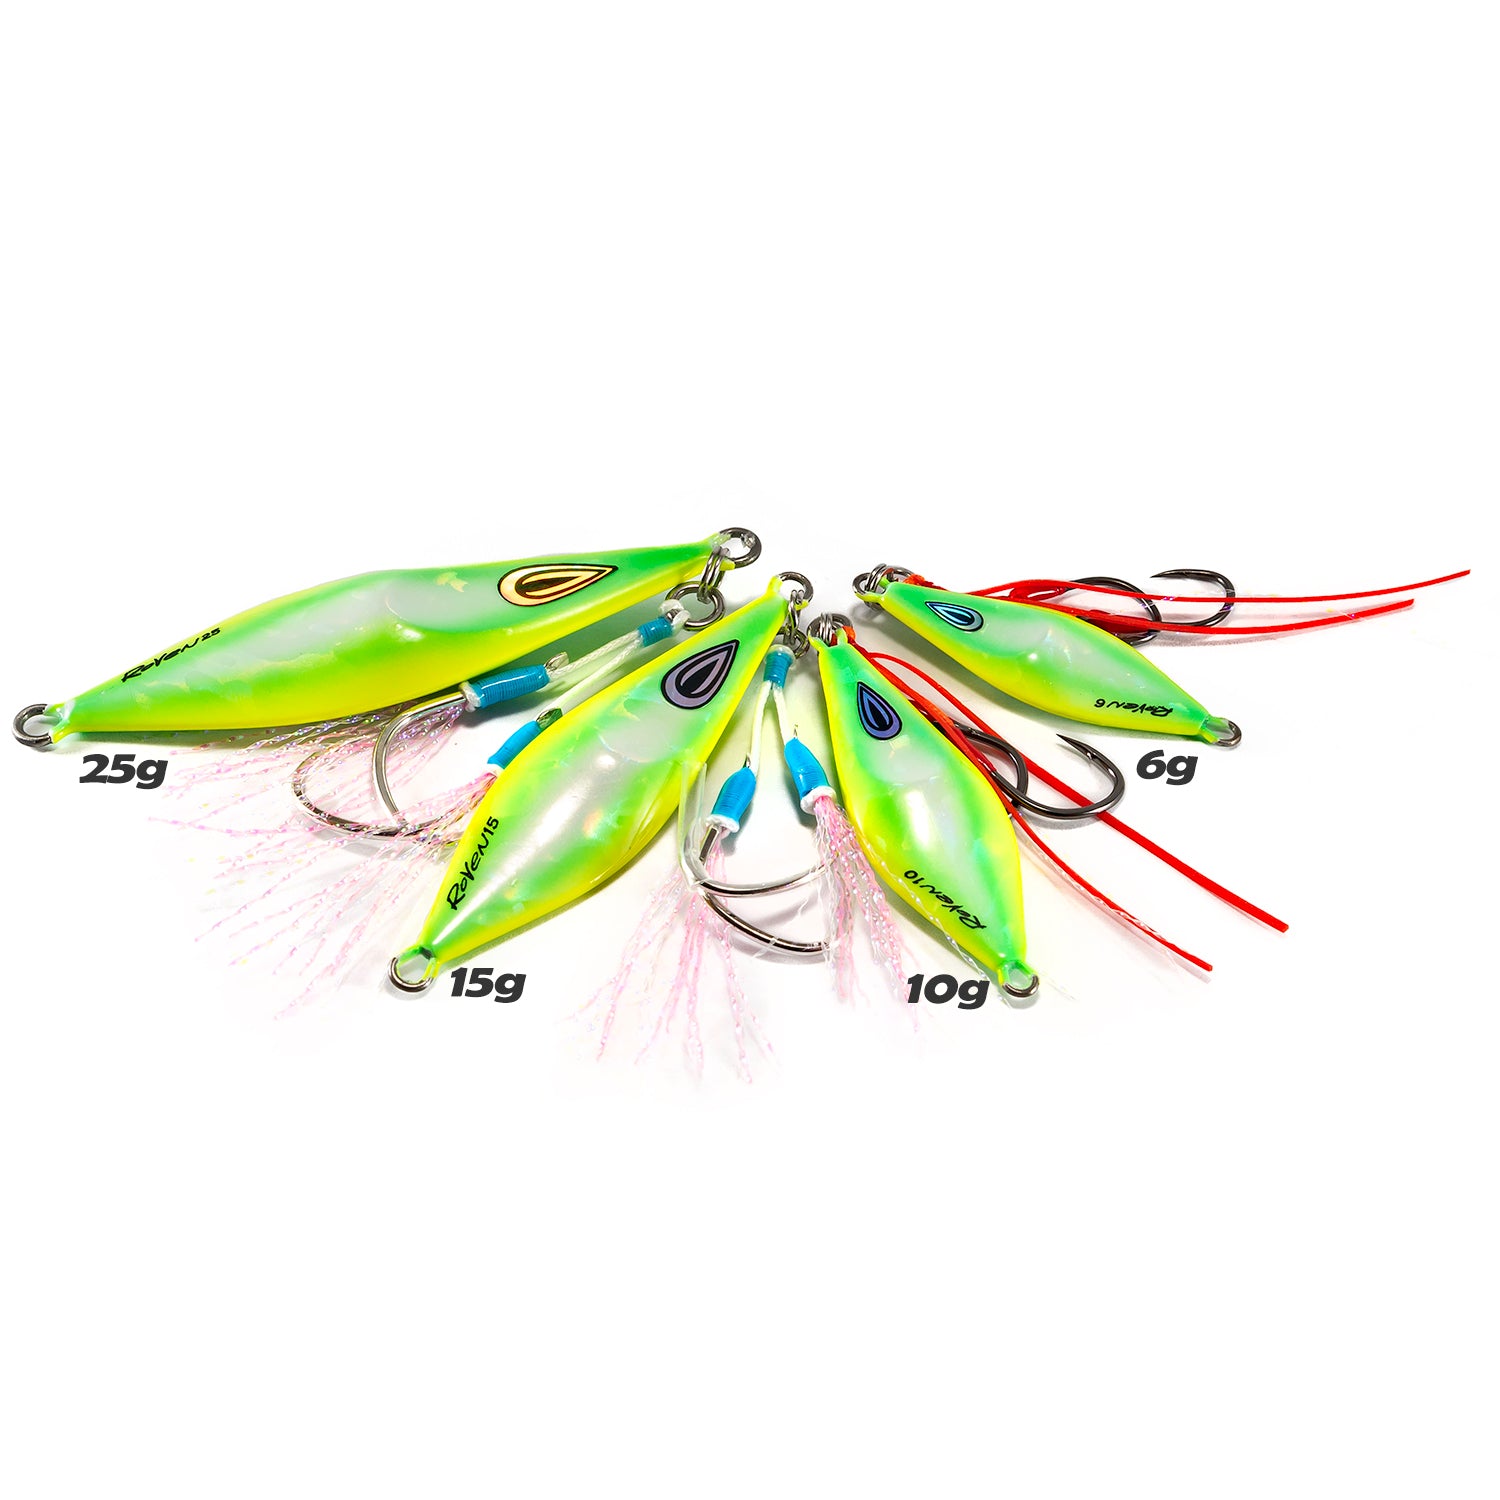 Oceans Legacy Roven Jig Rigged 6g Sizes